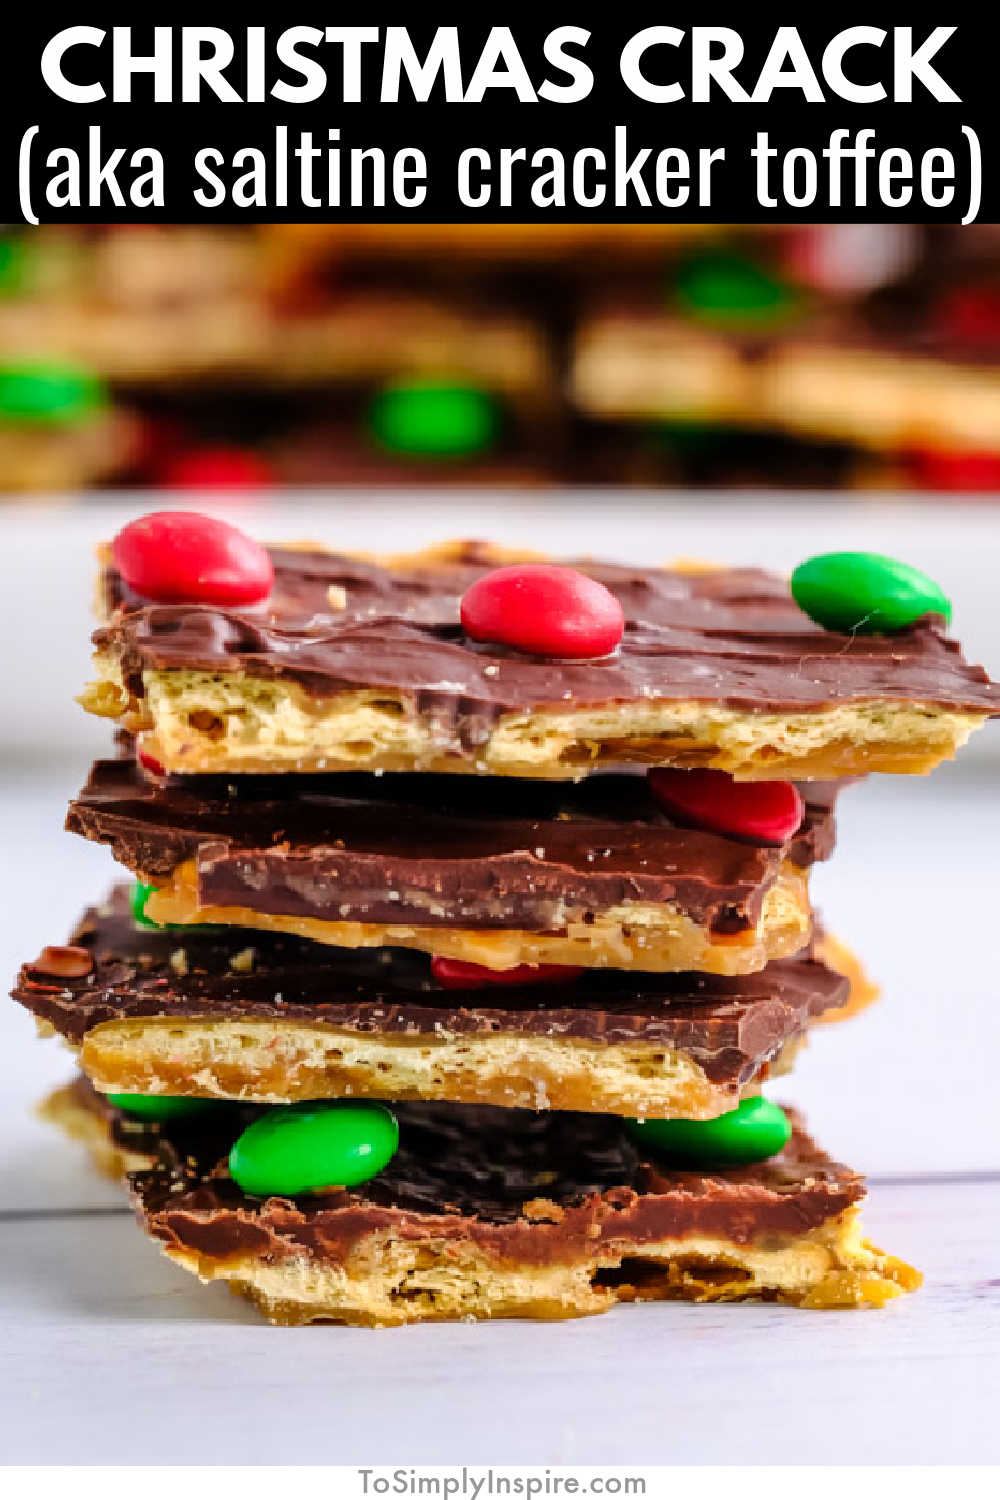 Christmas Crack Saltine Cracker Toffee - To Simply Inspire